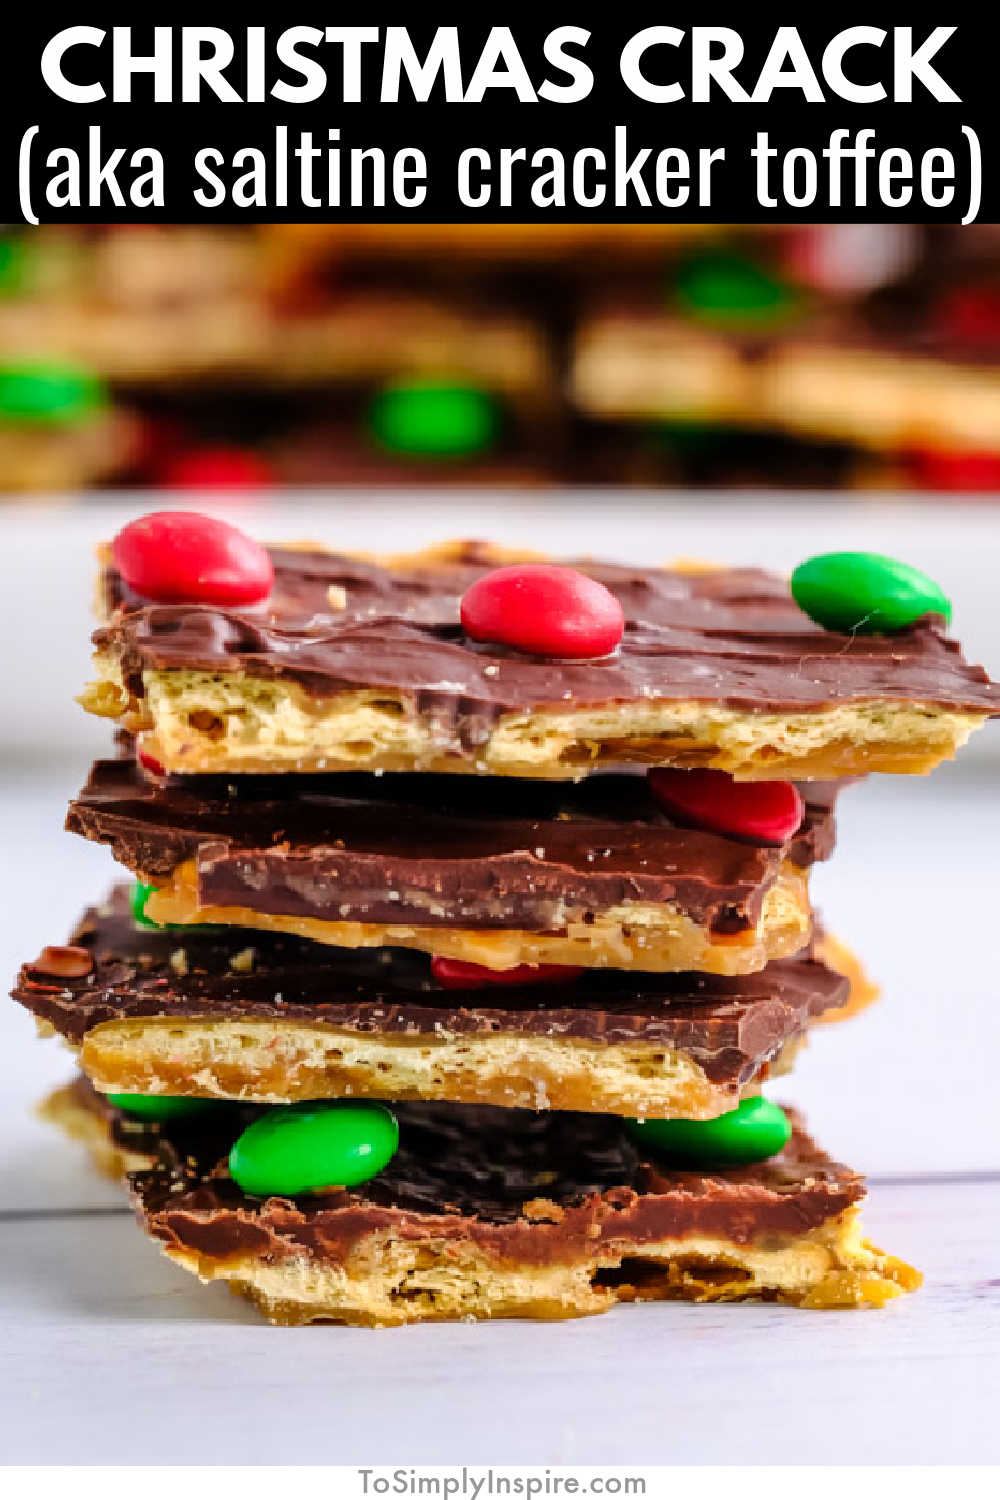 Christmas Crack Saltine Cracker Toffee - To Simply Inspire